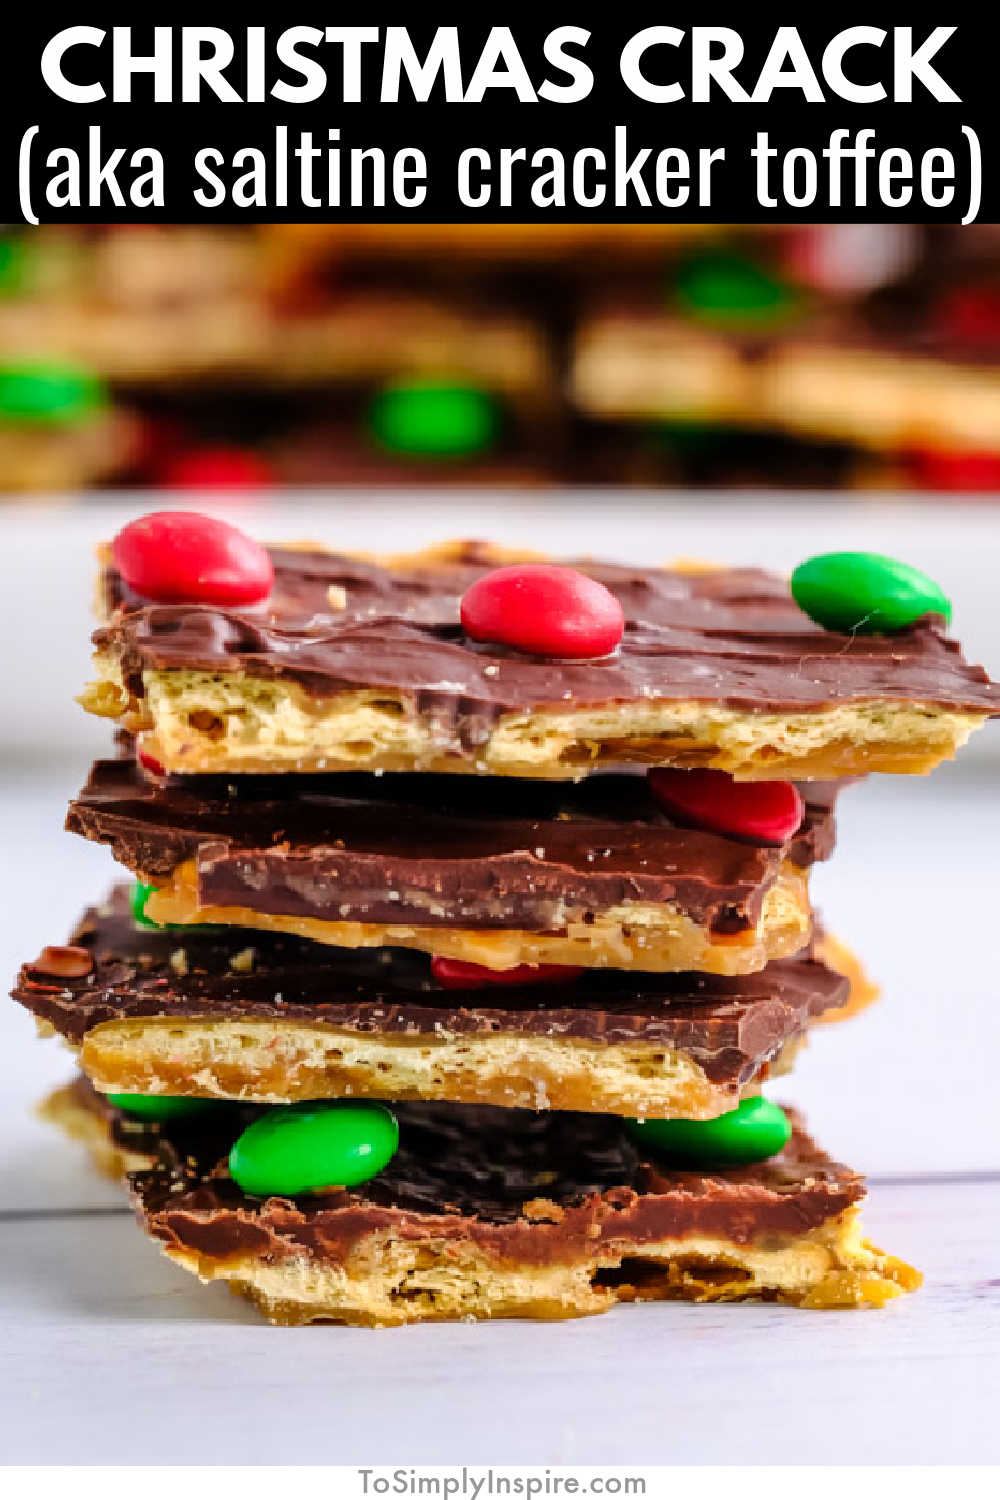 Christmas Crack Saltine Cracker Toffee - To Simply Inspire